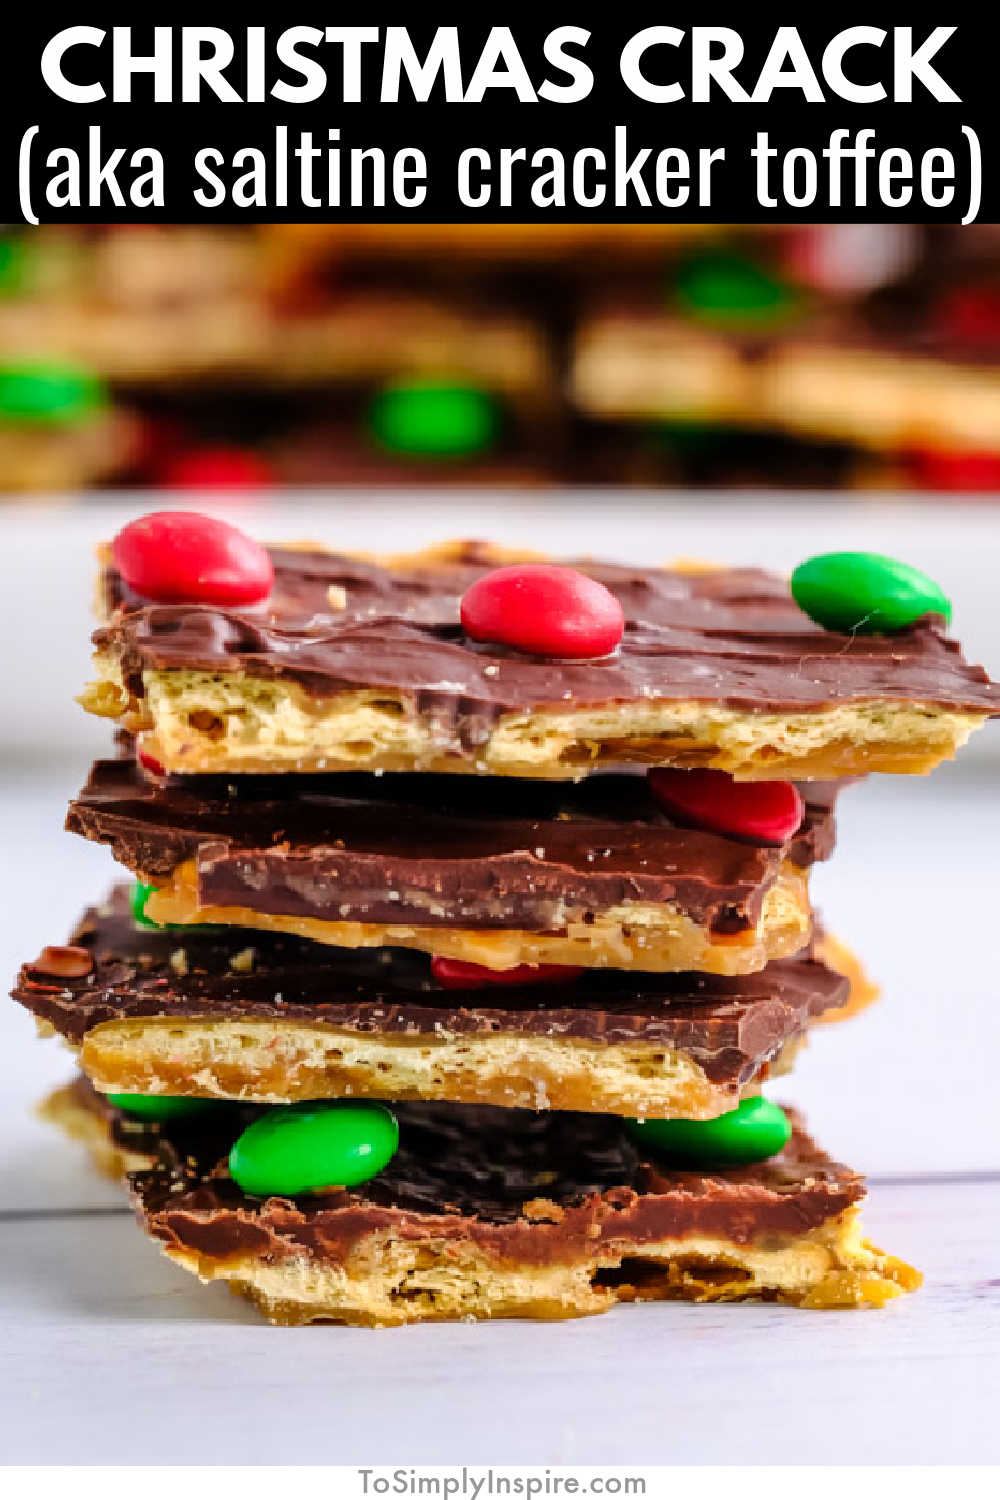 Christmas Crack Saltine Cracker Toffee - To Simply Inspire